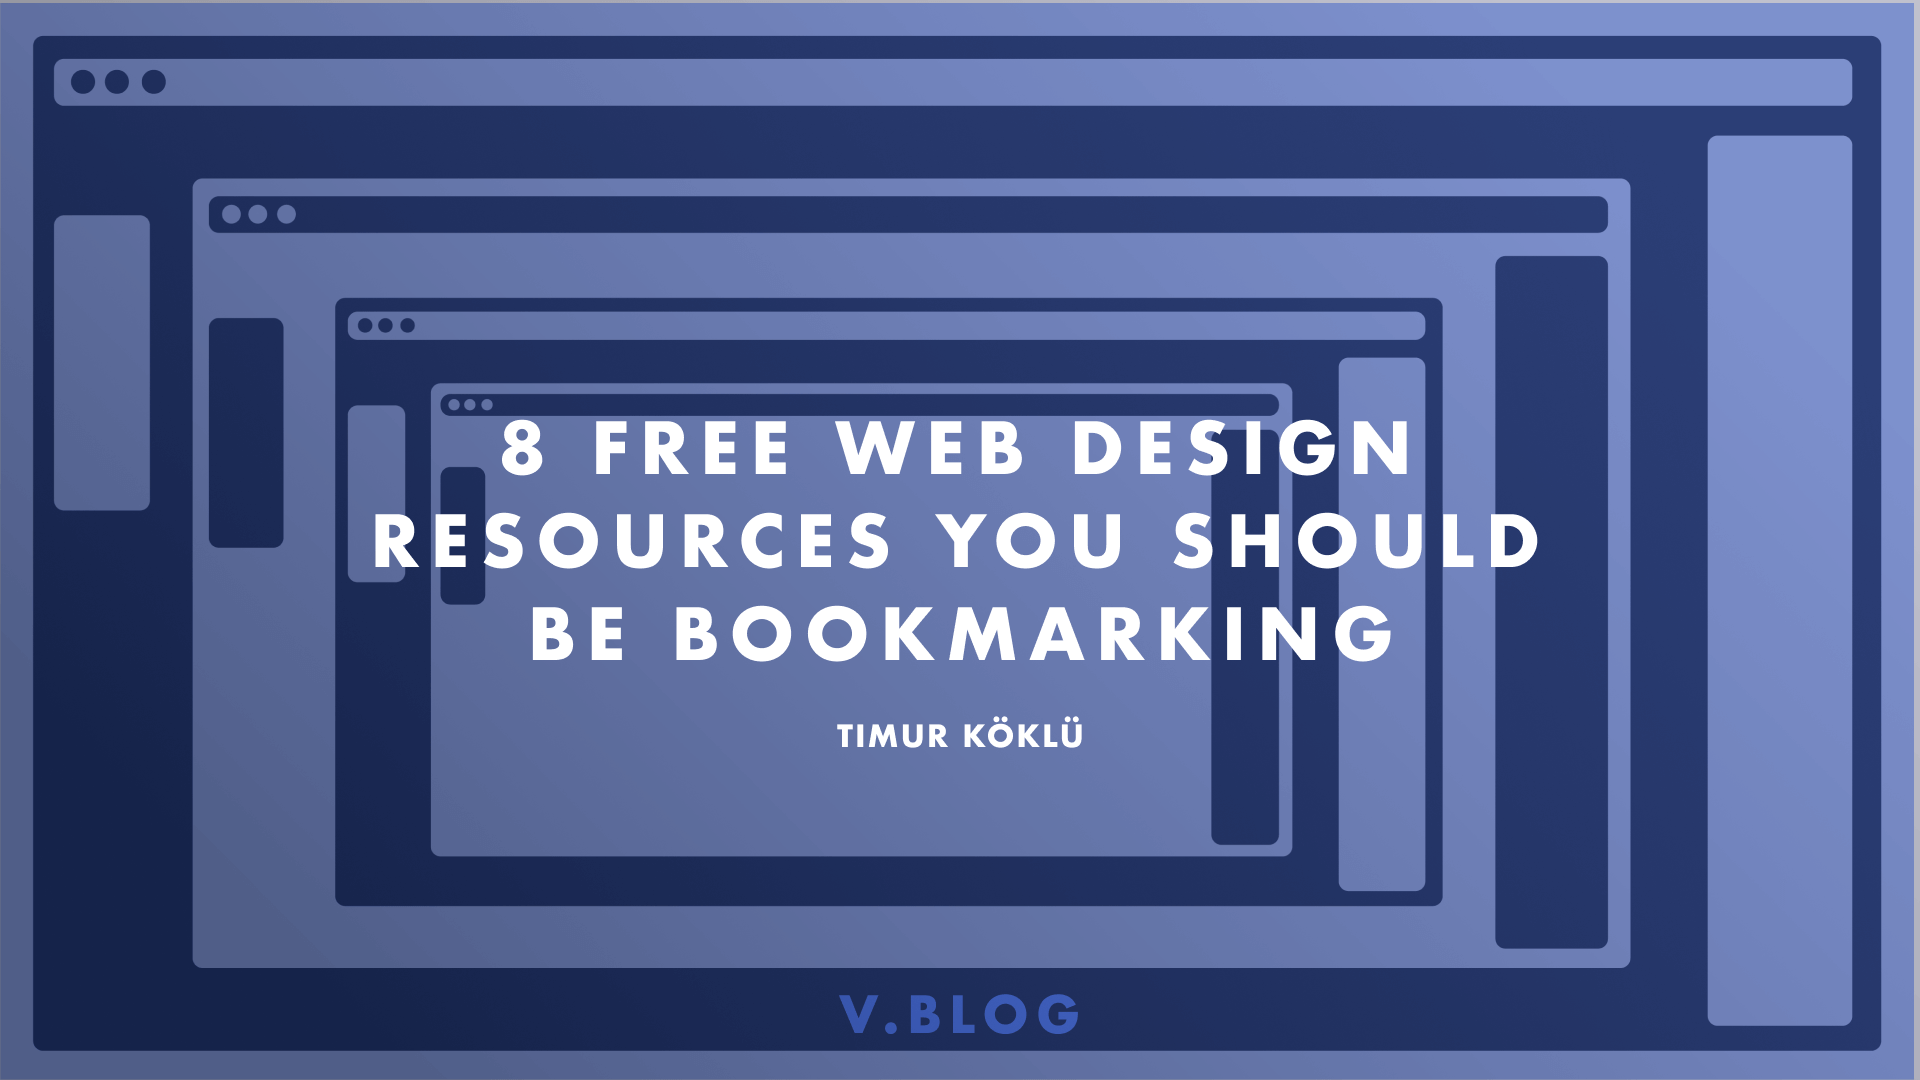 8 Free Web Design Resources You Should Bookmark